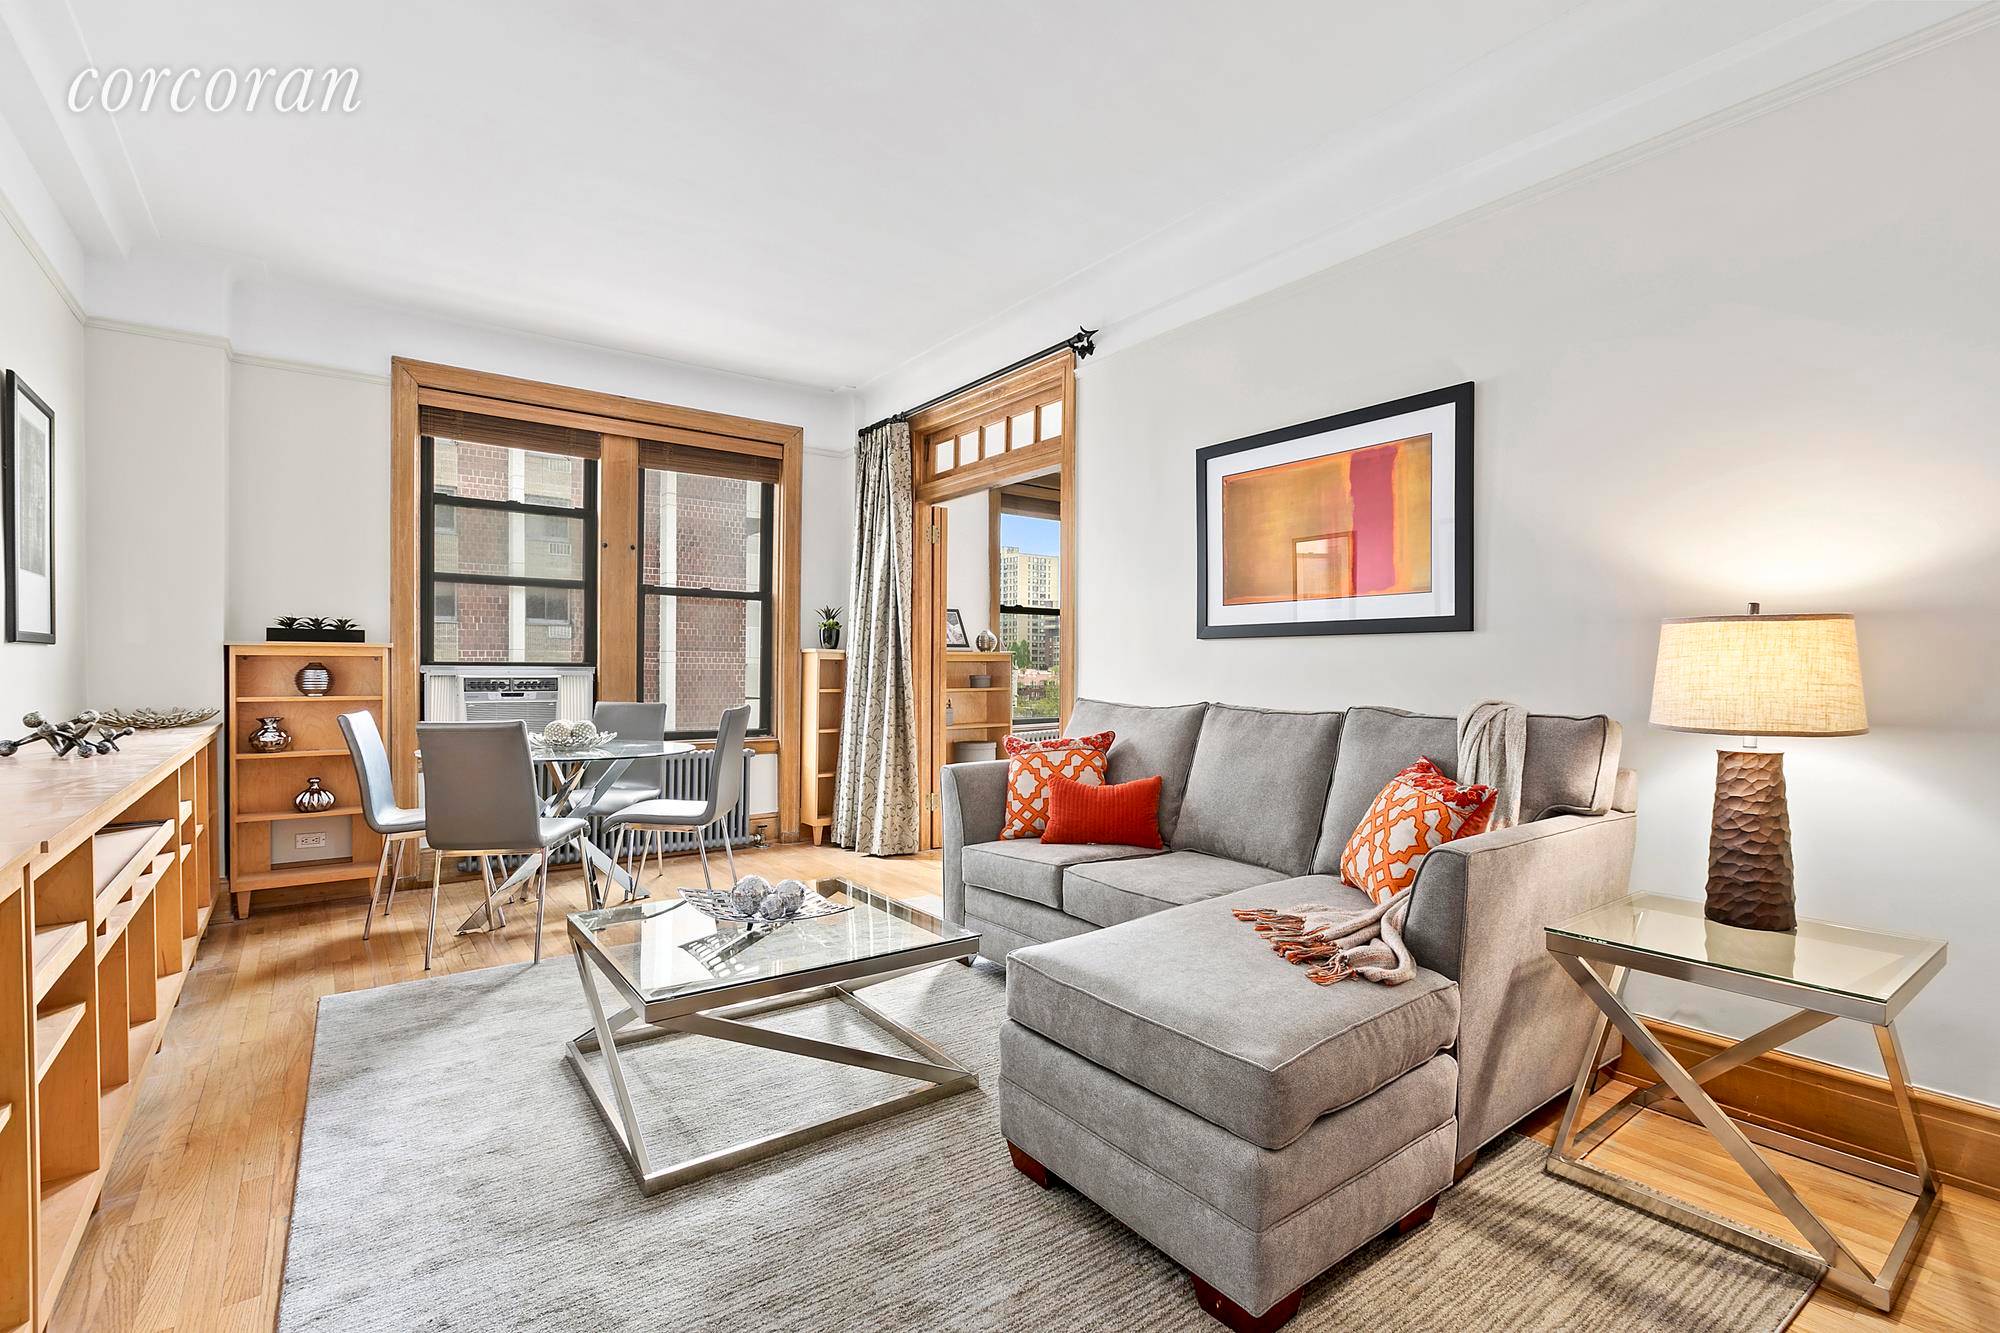 176 West 87 Street, Apartment 7A is a gracious corner 1 bedroom apartment in excellent condition, ideally located on the corner of 87th and Amsterdam, offering open views North, East ...